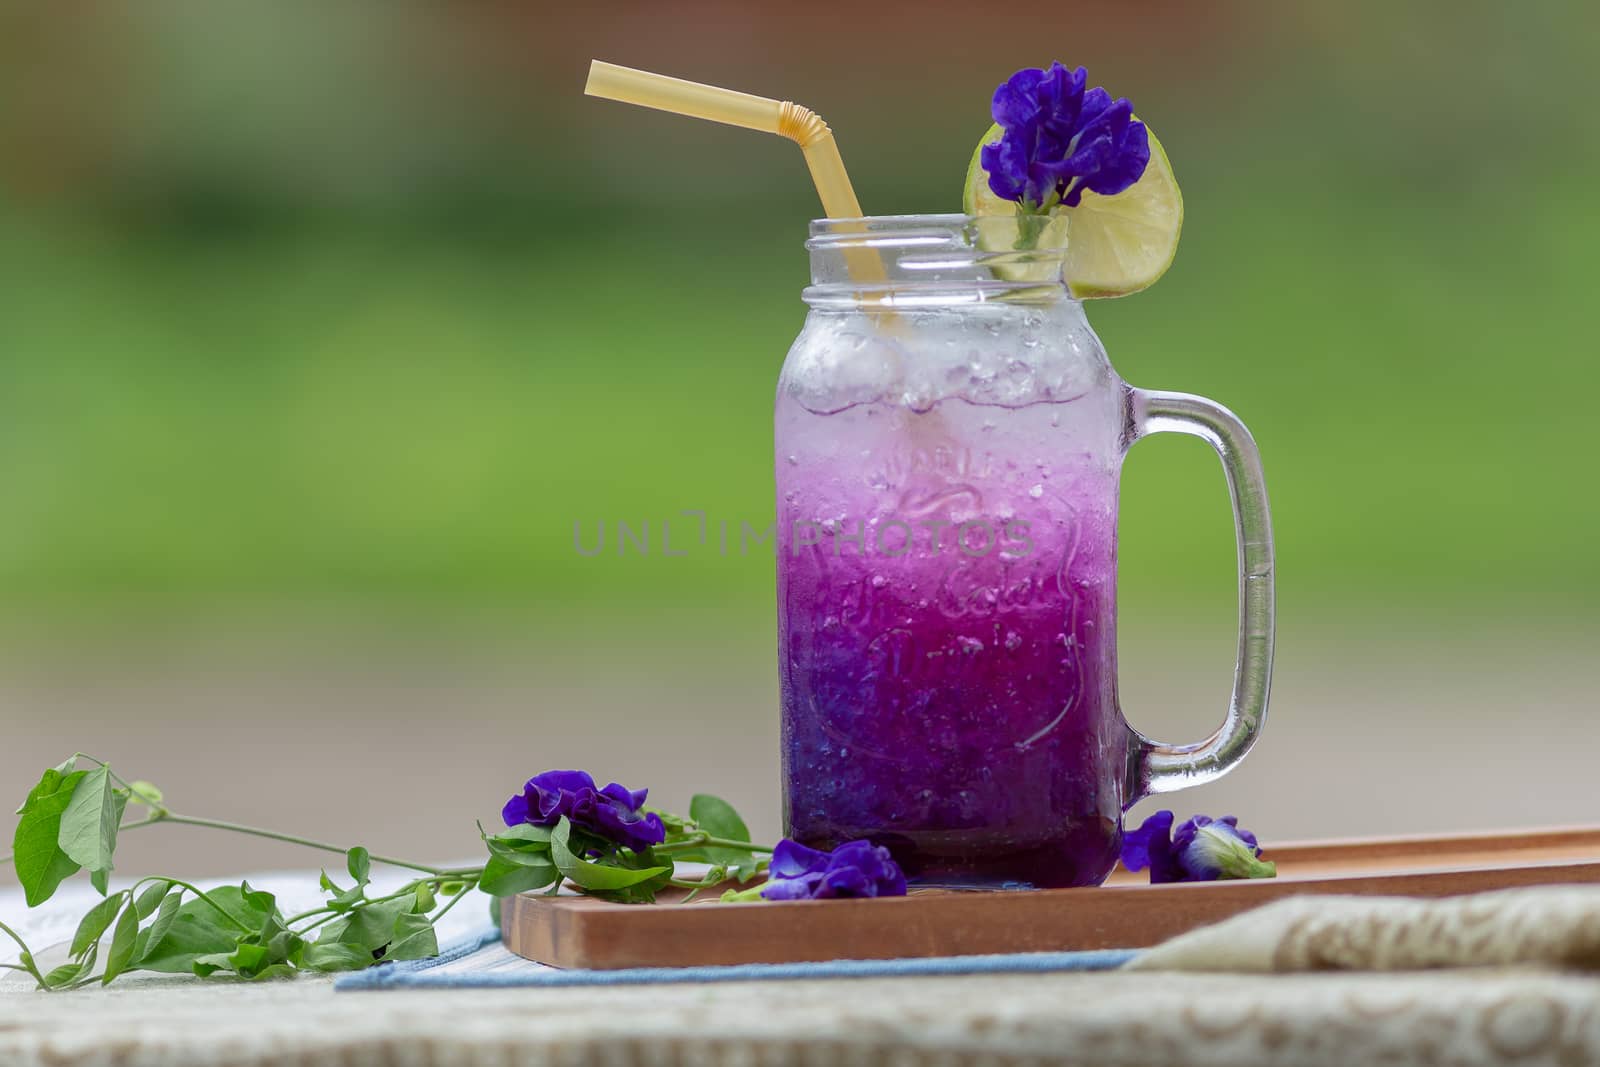 Fresh purple Butterfly pea or blue pea flower and lemon juice in glass with green blur background.